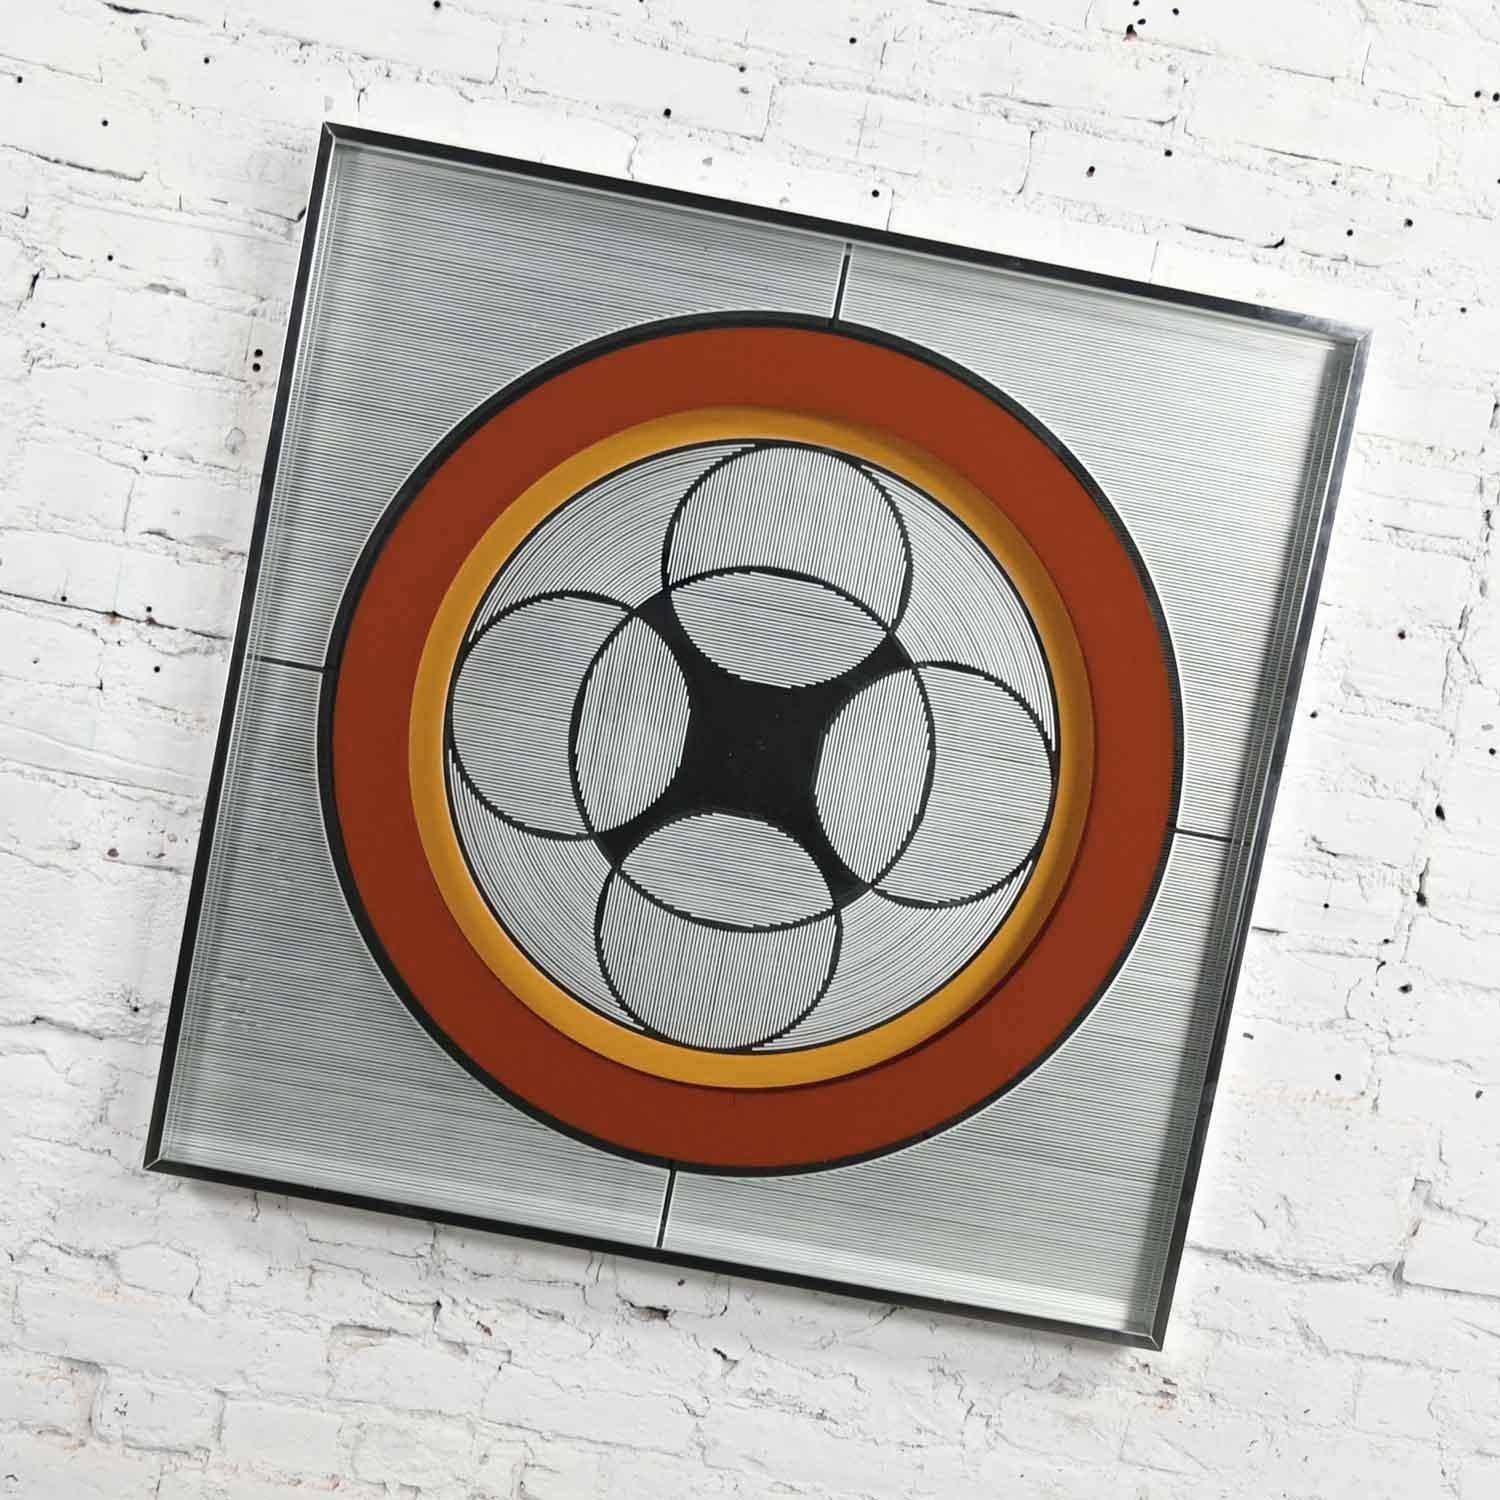 Gorgeous vintage modern mod op art or pop art mirror style # 1034 tag on reverse from Greg Copeland studio. Beautiful condition, keeping in mind that this is vintage and not new so will have signs of use and wear. We have cleaned all pieces &